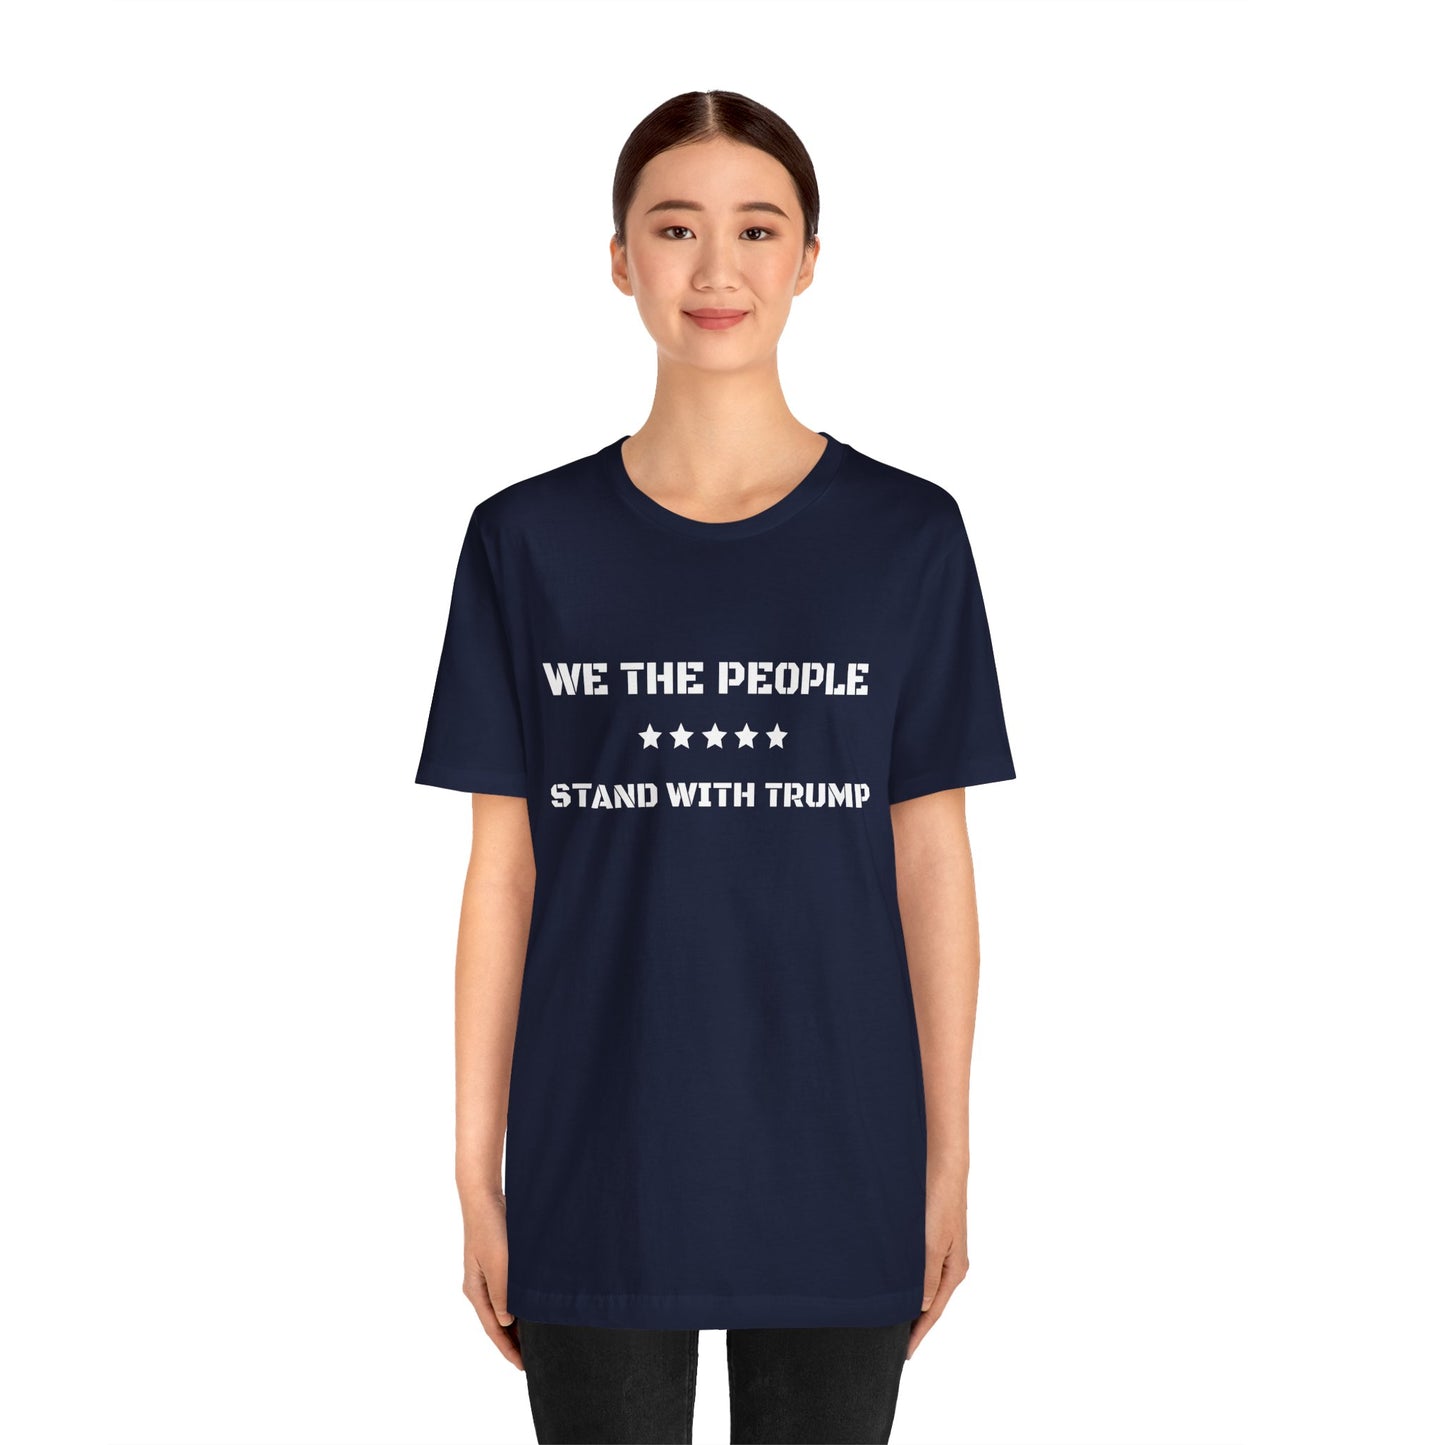 Women's "We the People" T-Shirt